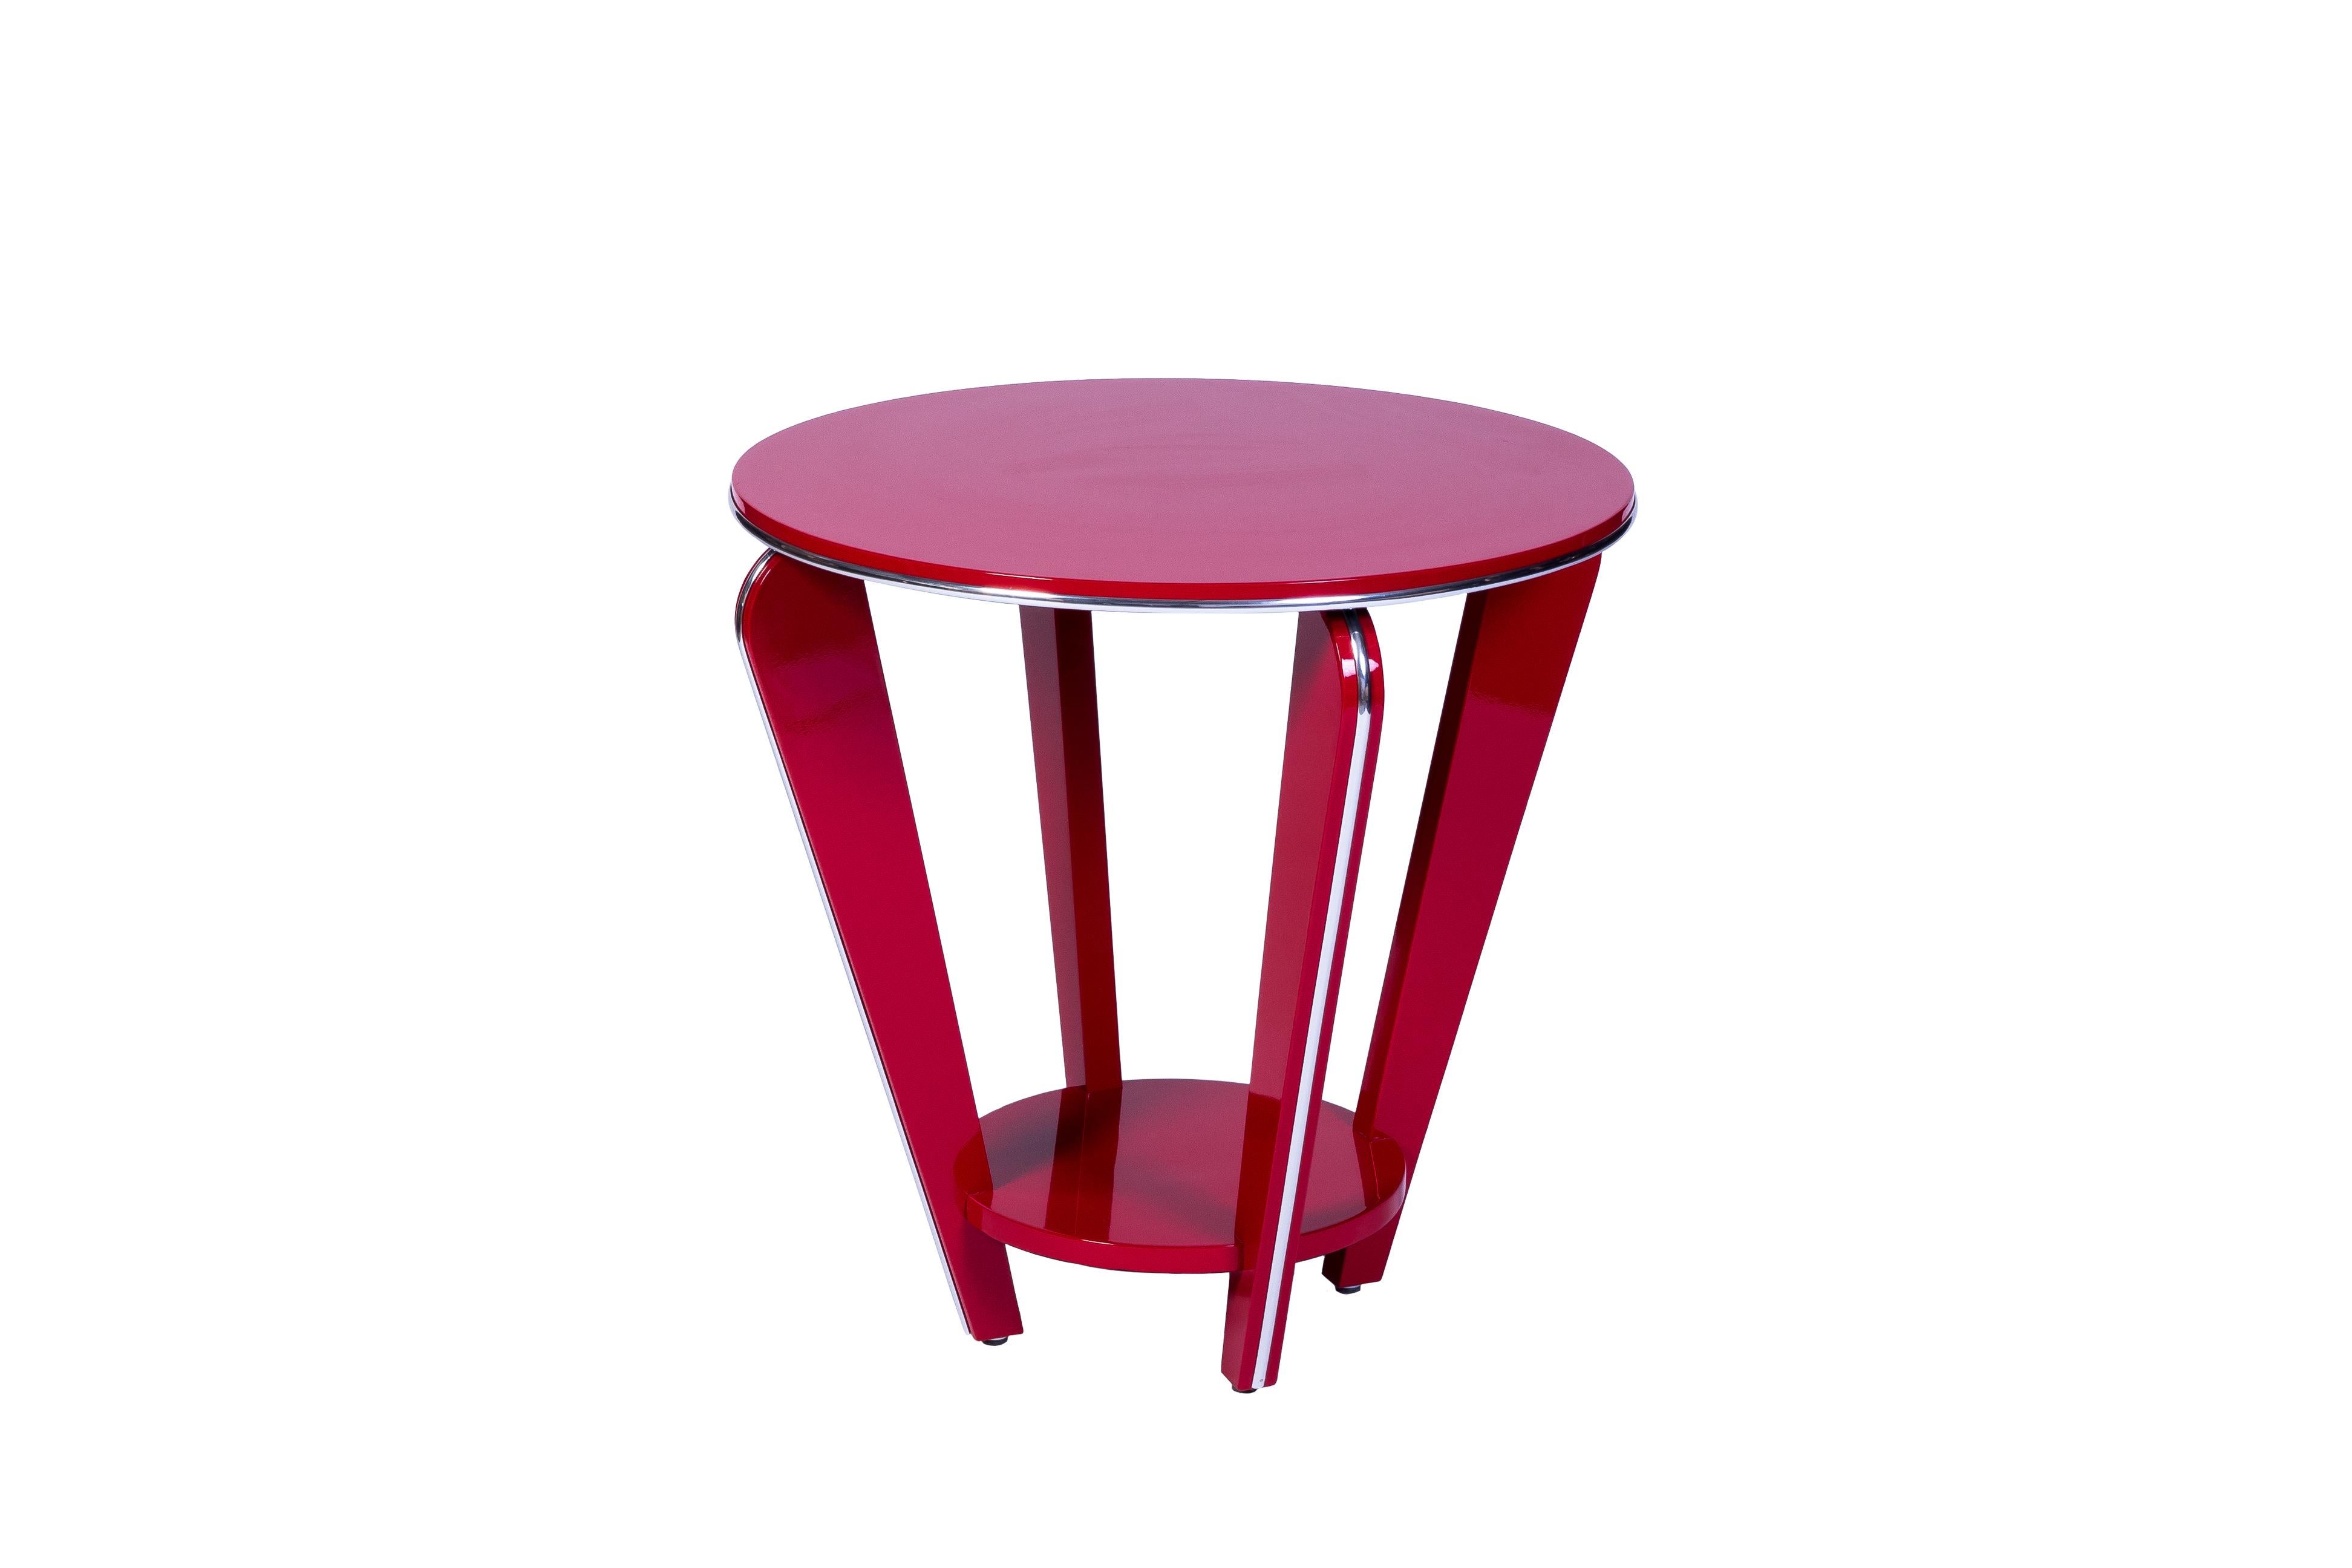 This beautiful Art Deco style end or side table features a conical design with curved legs, chrome detailing and a beautiful high gloss crimson lacquer finish.

Made in Germany, circa 2016.